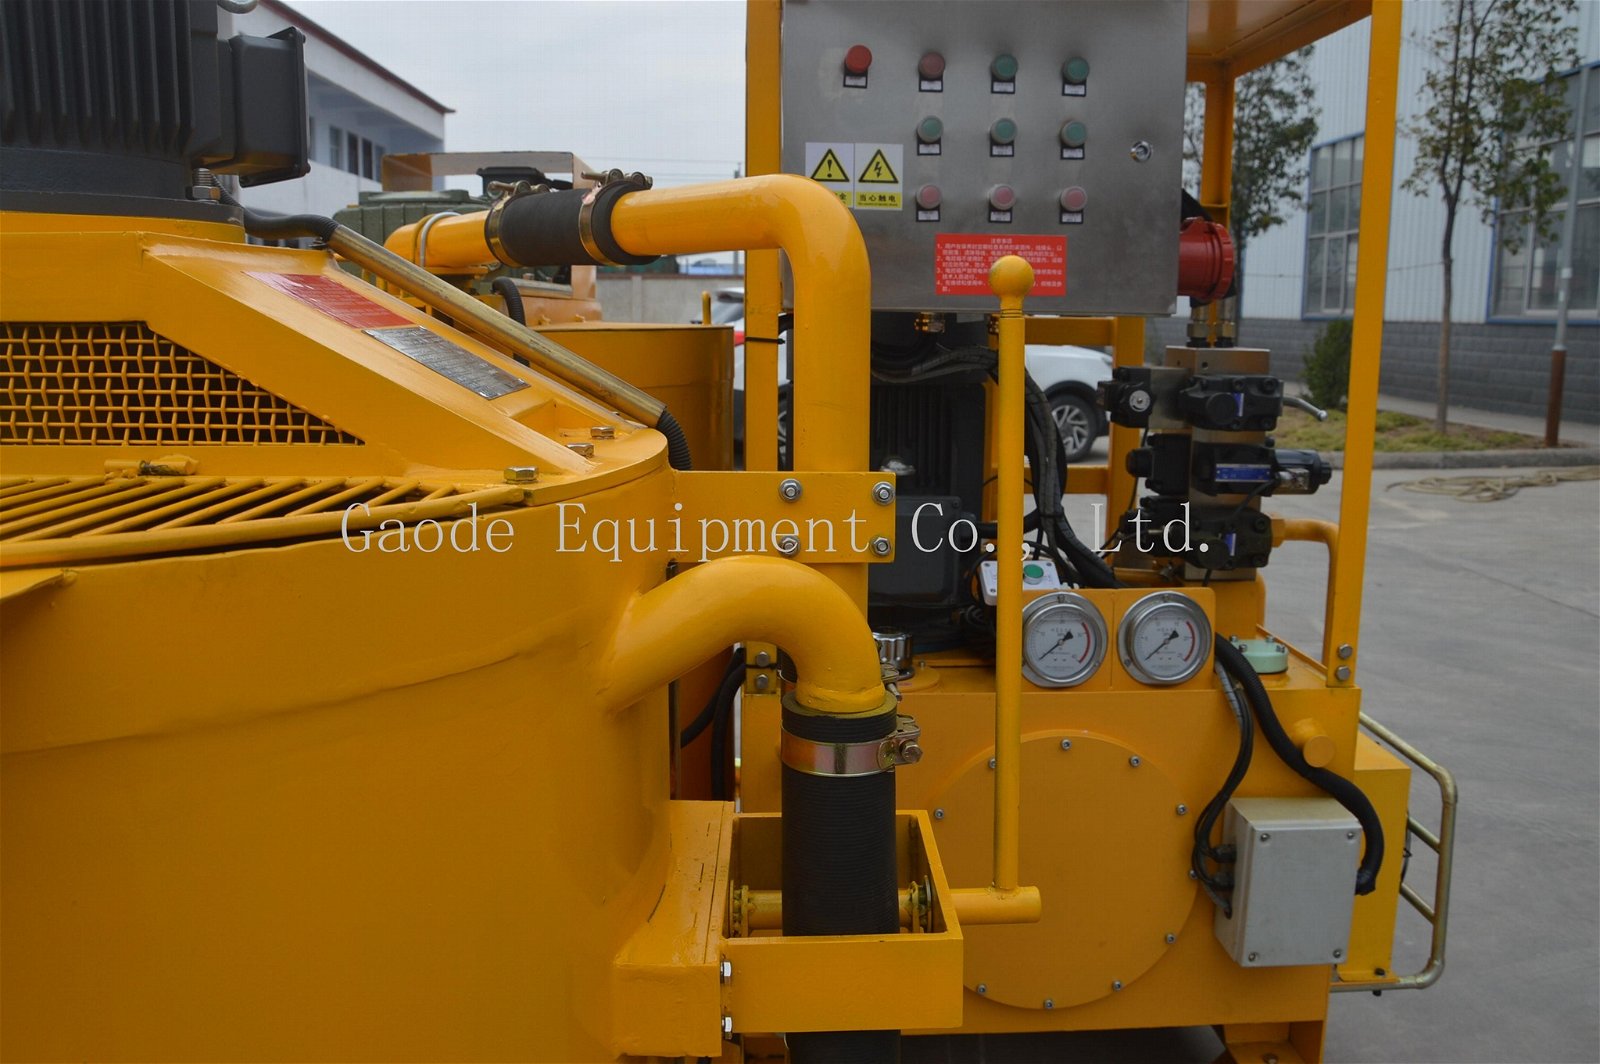 Supply GGP400/700/80 PL-E grout station with factory price 4